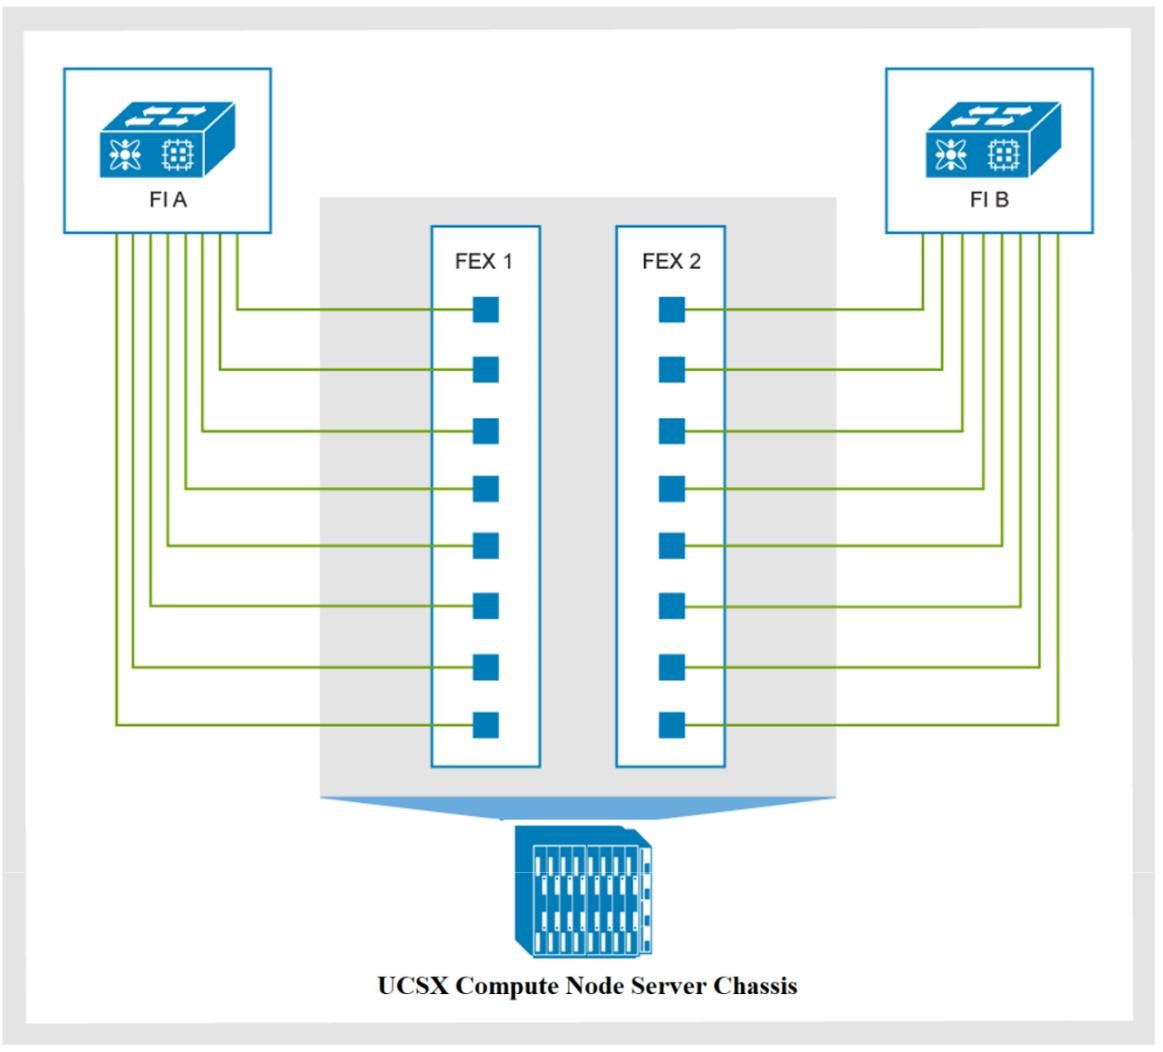 A diagram of an eight-link IFM at 100 Gbps port speed with FEX to FI connections on a Cisco UCS X server chassis with a 9108-100G IFM